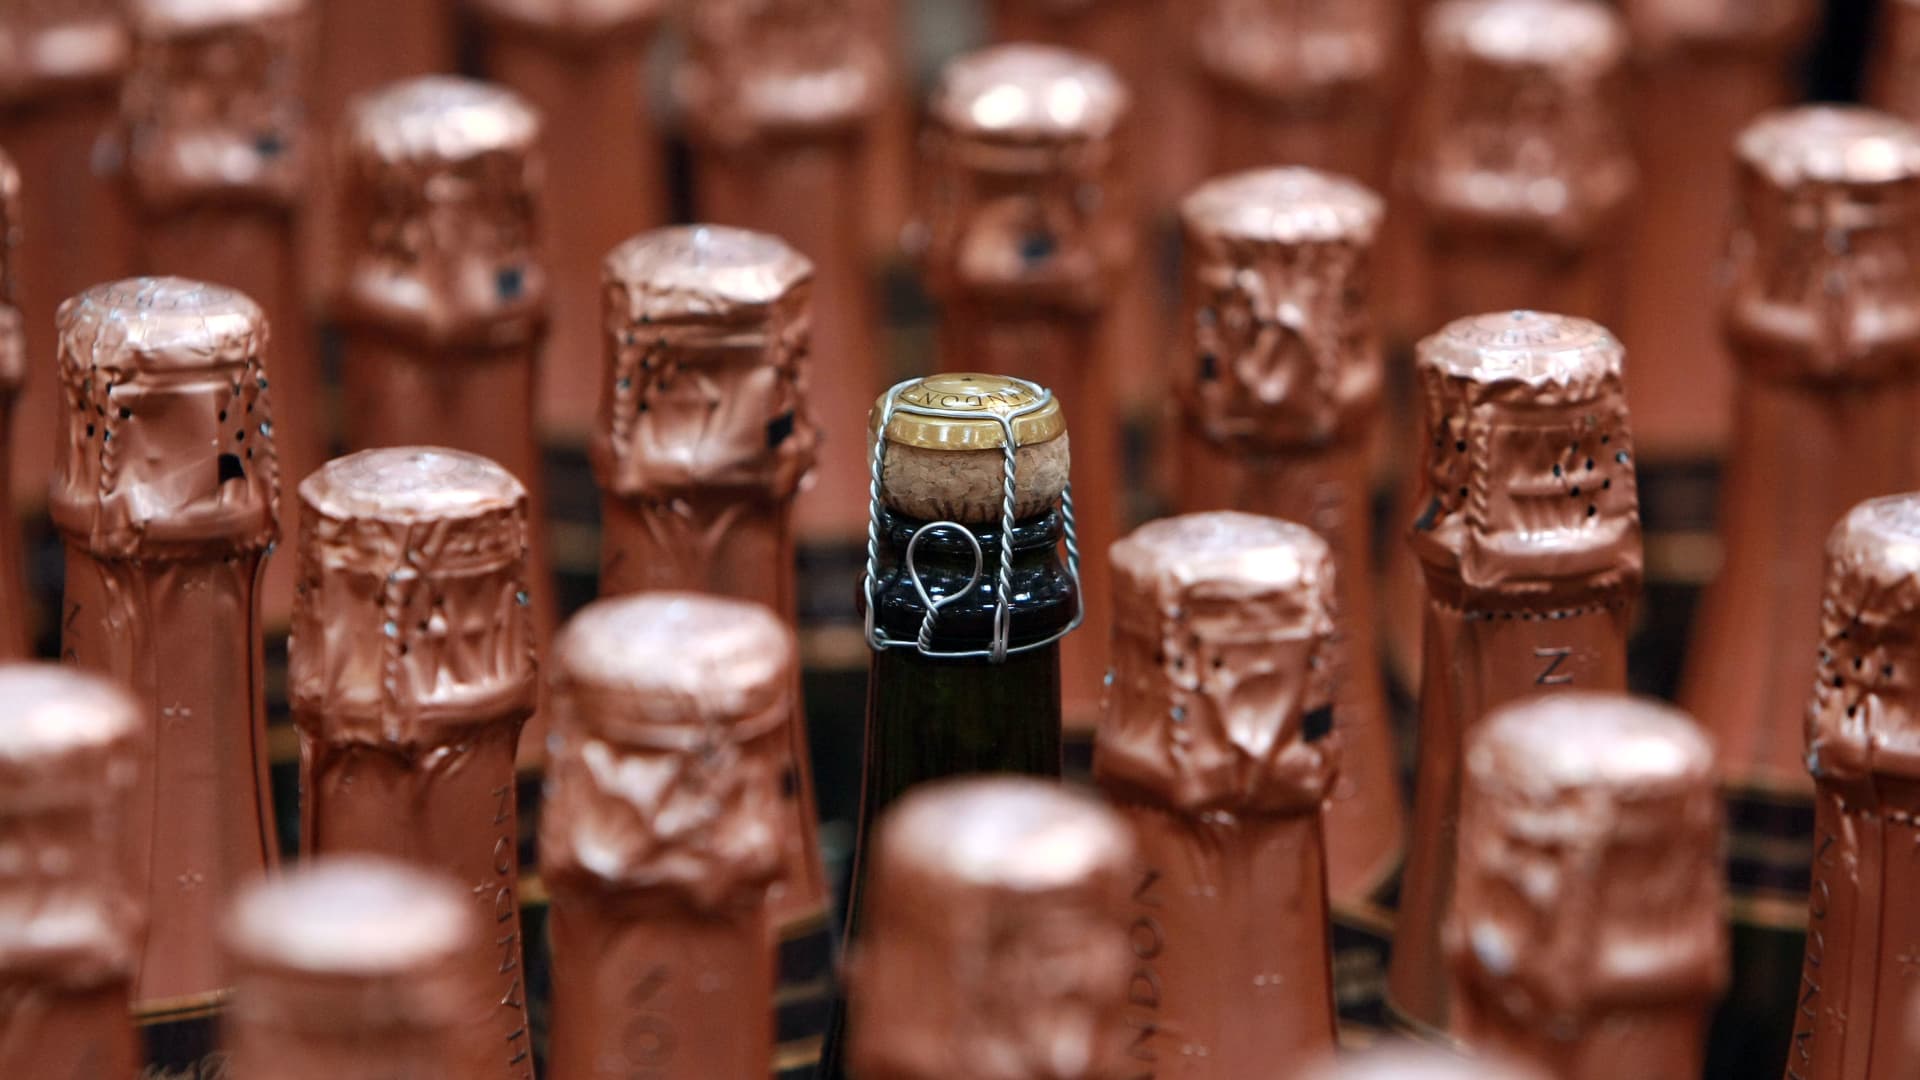 Bottles of sparkling wine are seen in San Francisco, California.